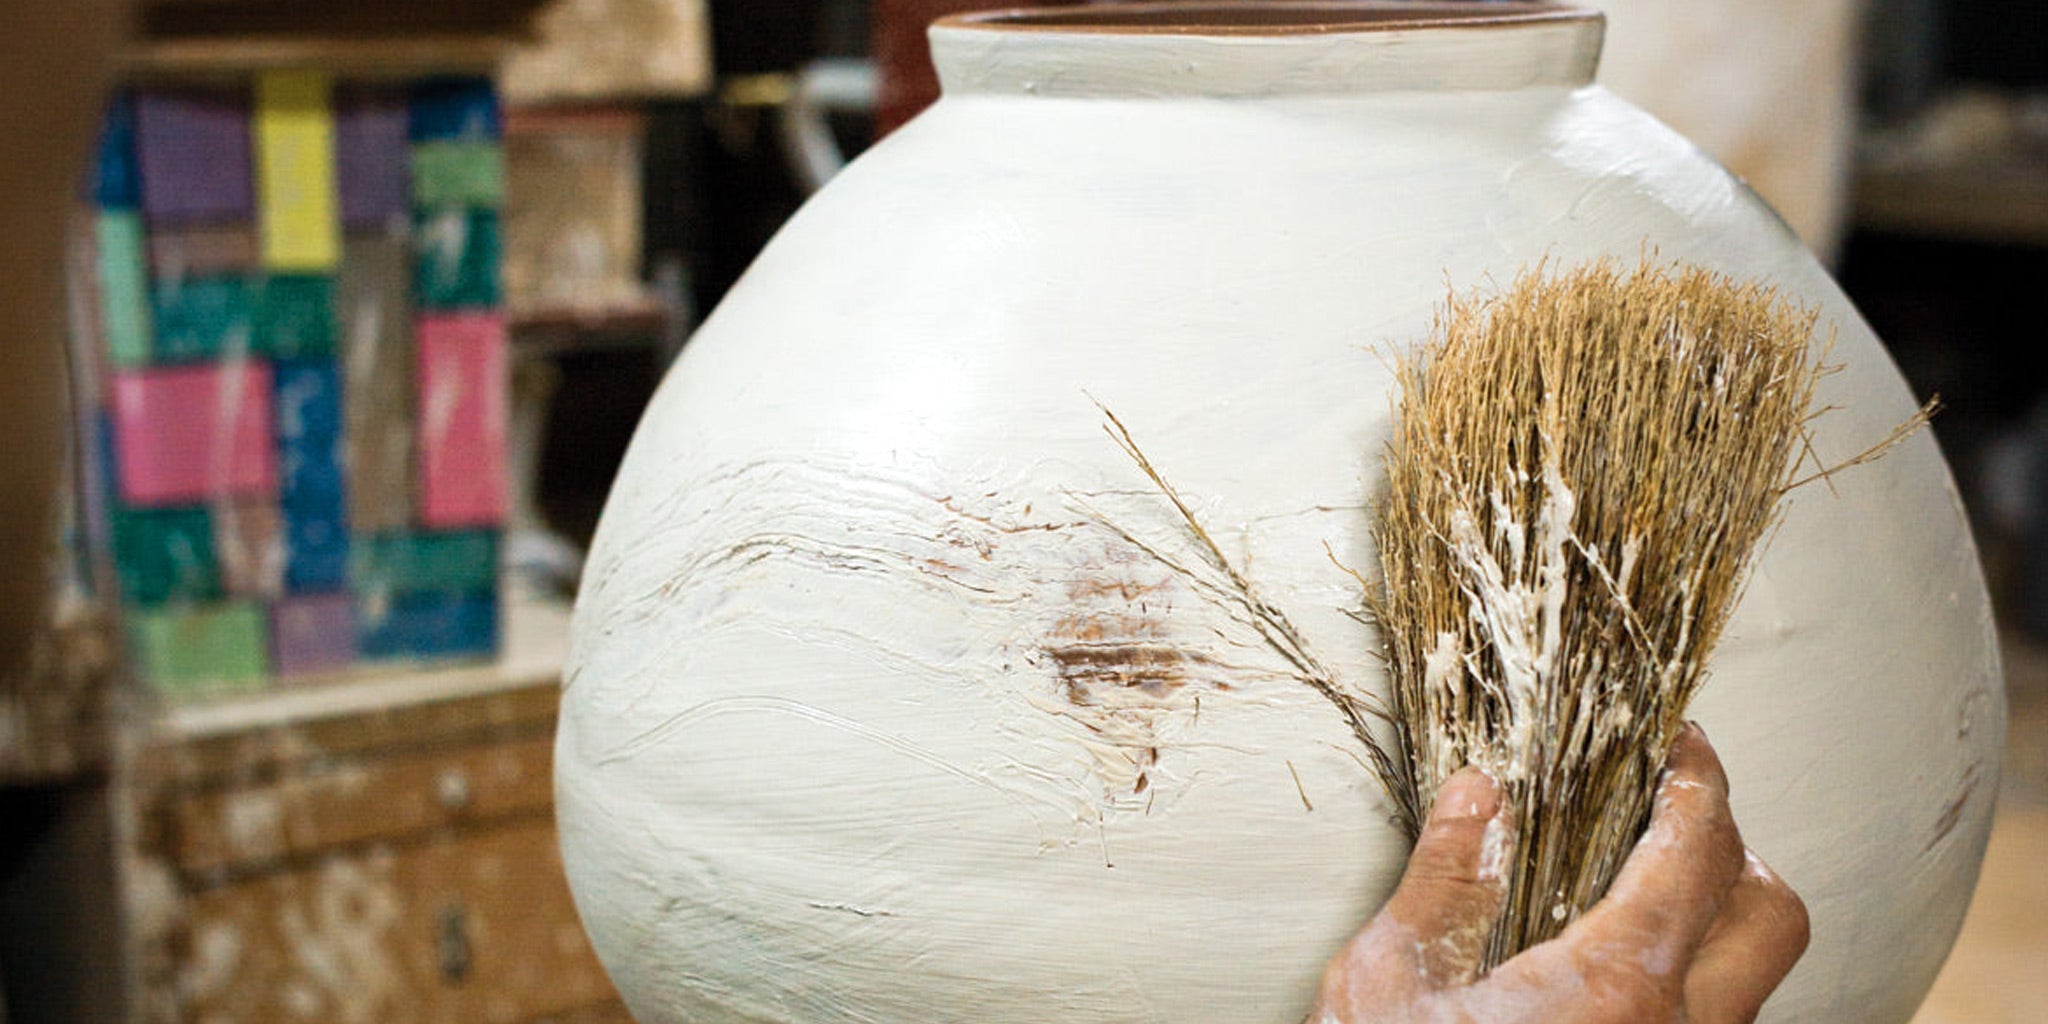 7 Best Pottery Classes in London to Learn to Make Ceramics